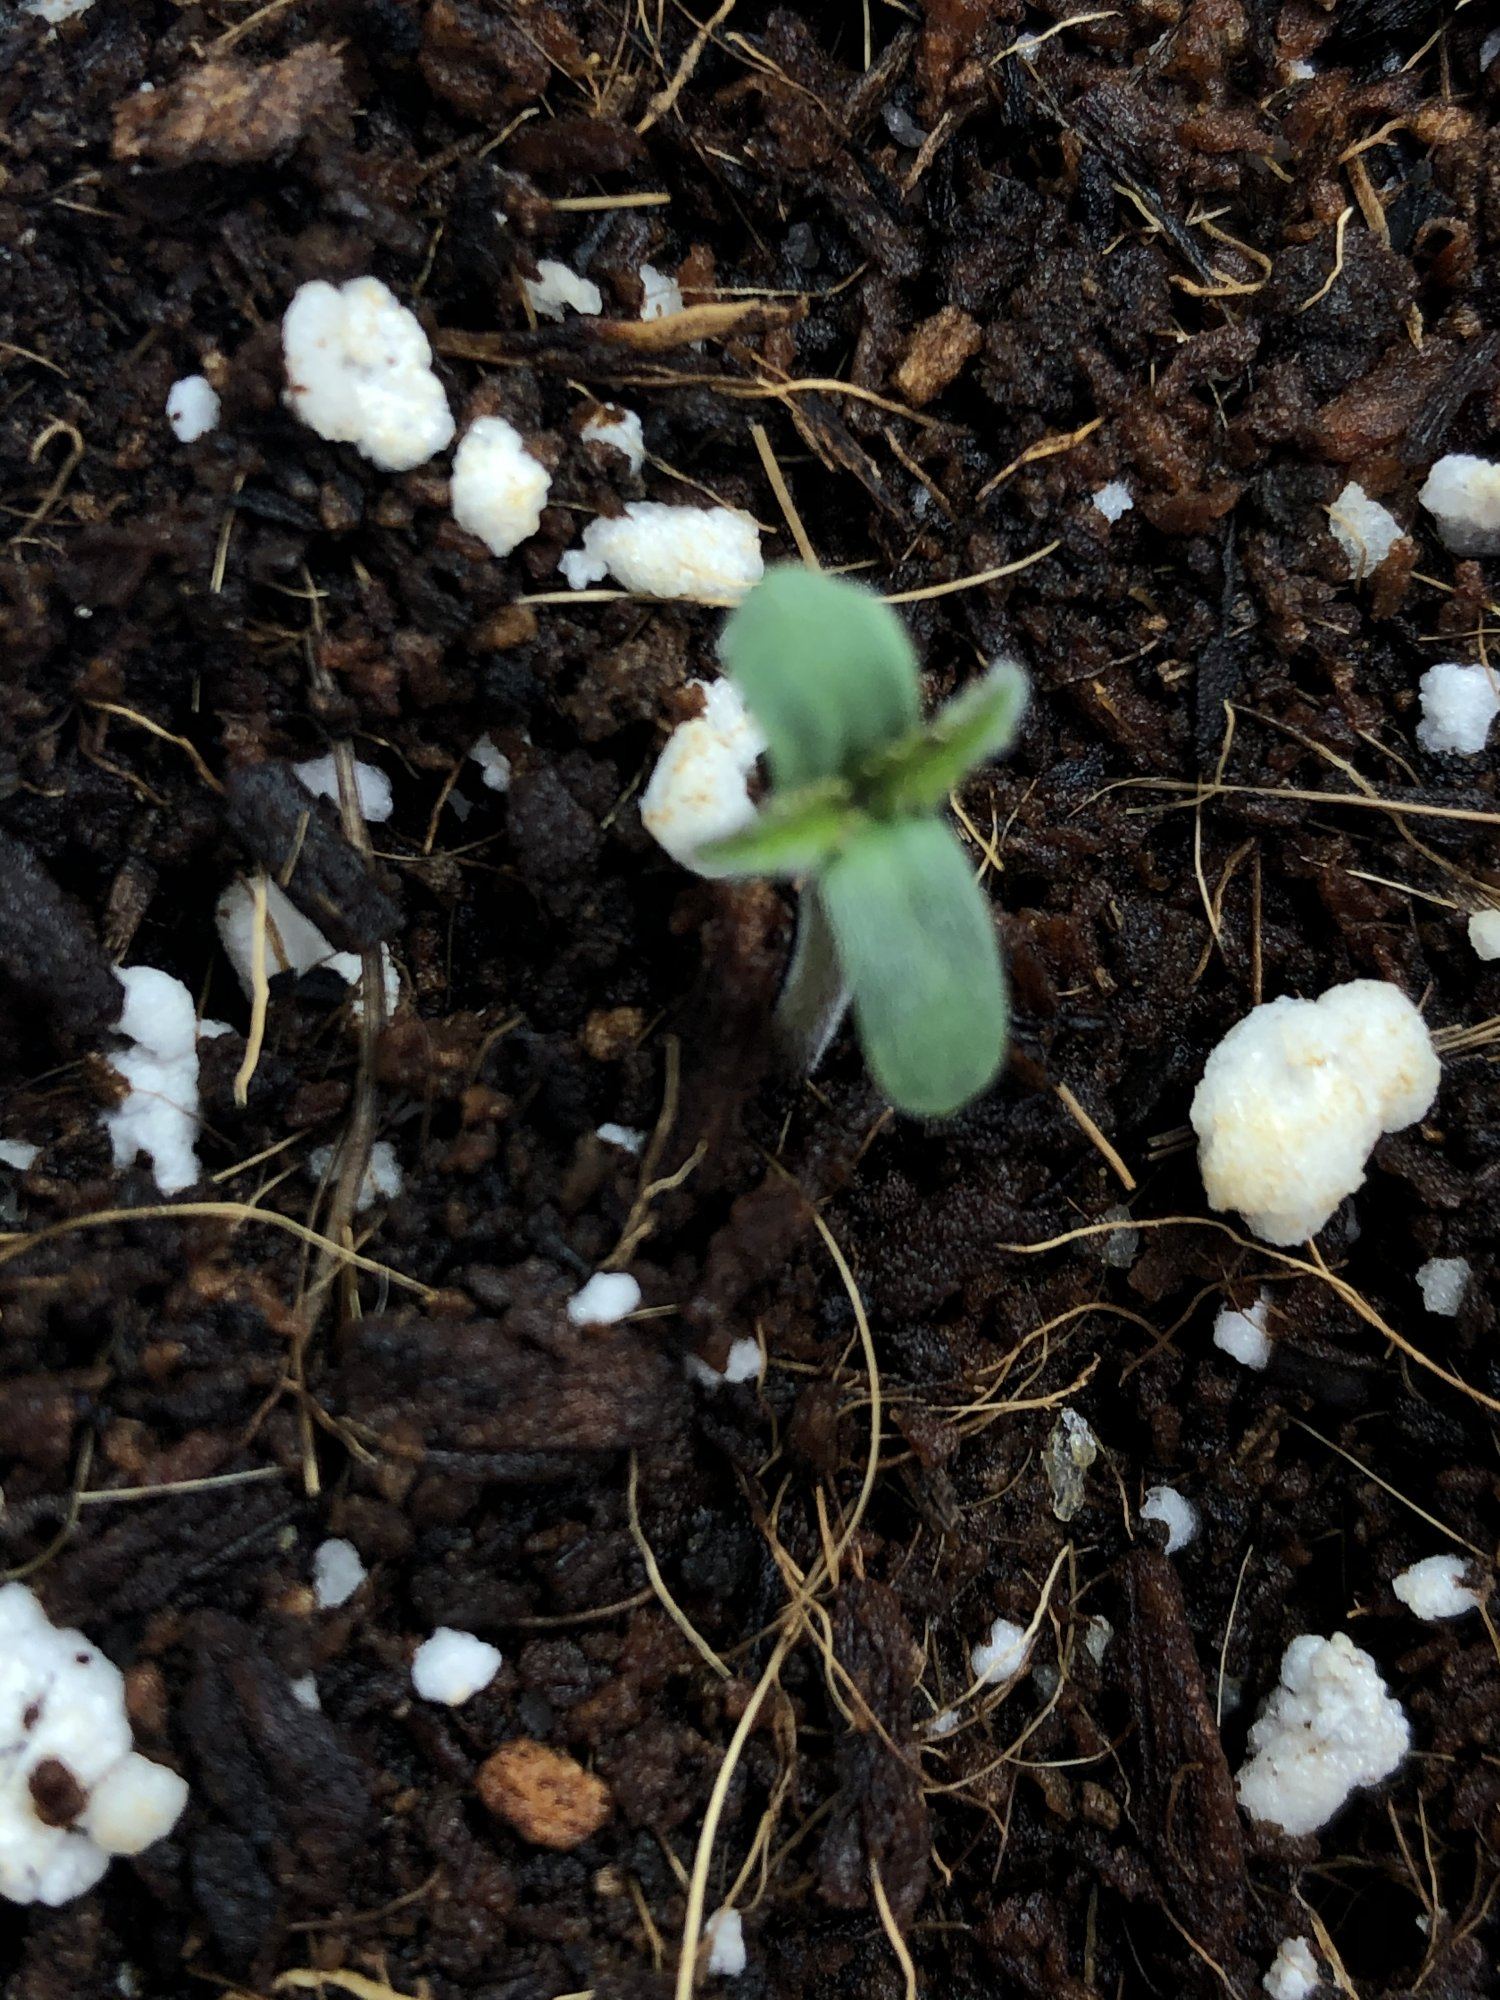 Not sure whats good with new seedling